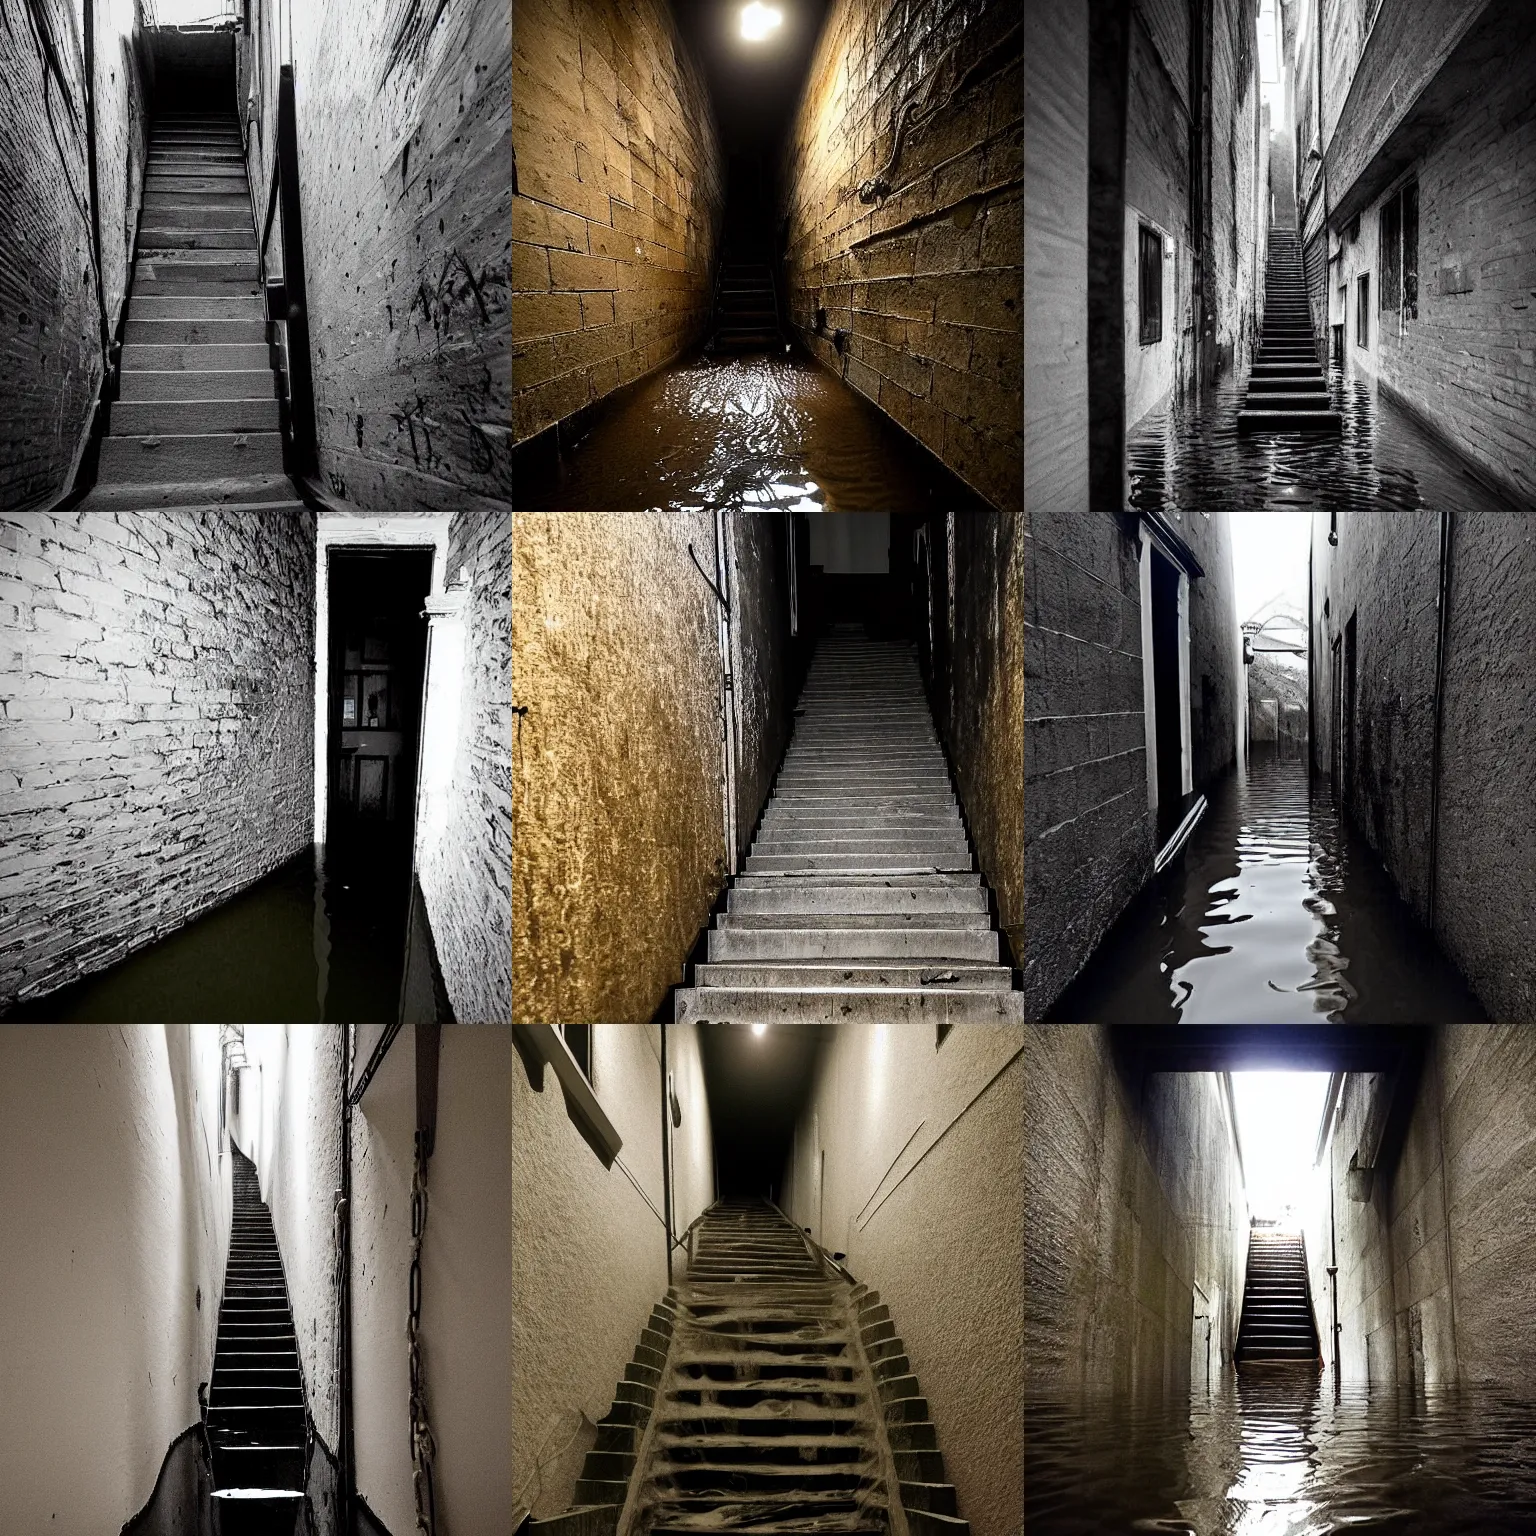 Prompt: A narrow flooded stairway leading down into the darkness, spooky, eerie, unsettling